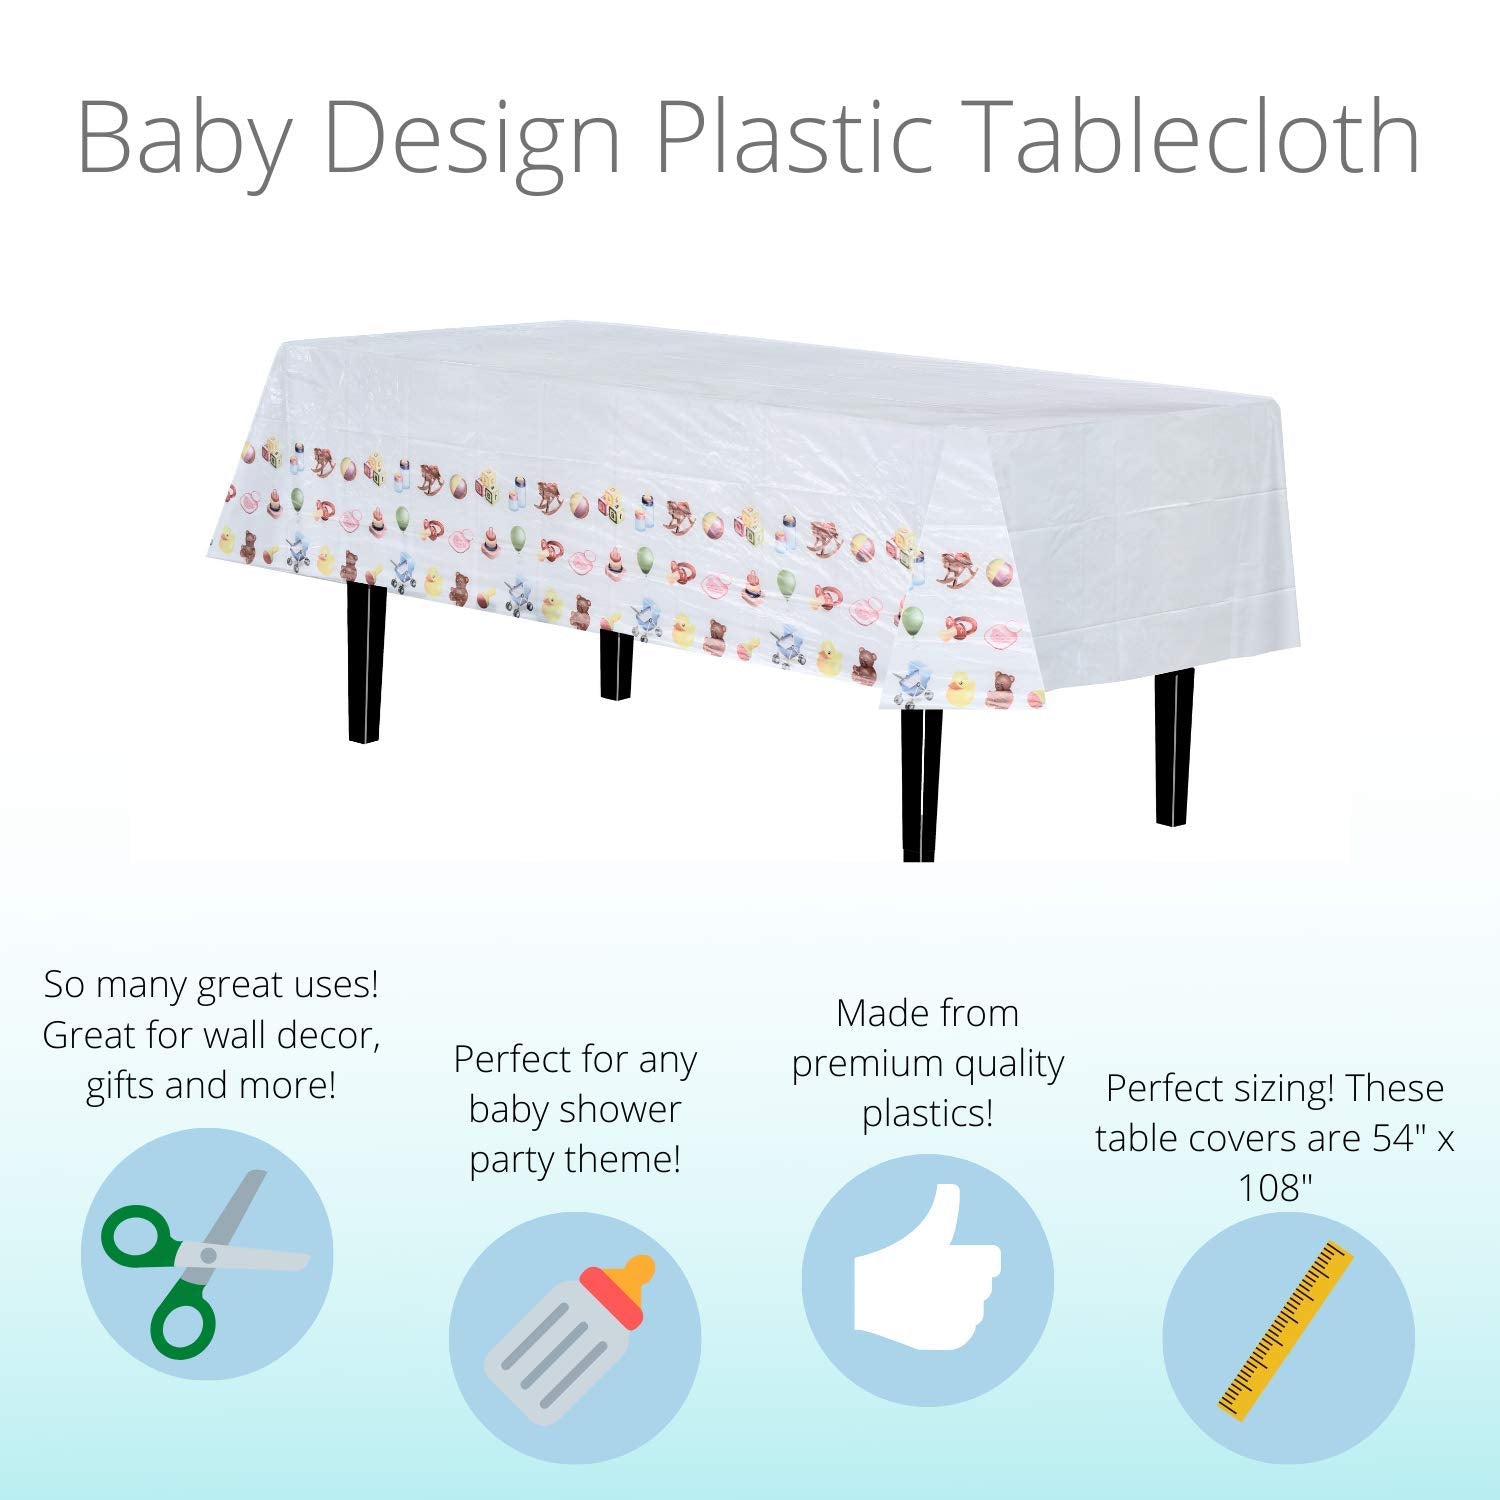 Baby Designs Plastic Table Cover